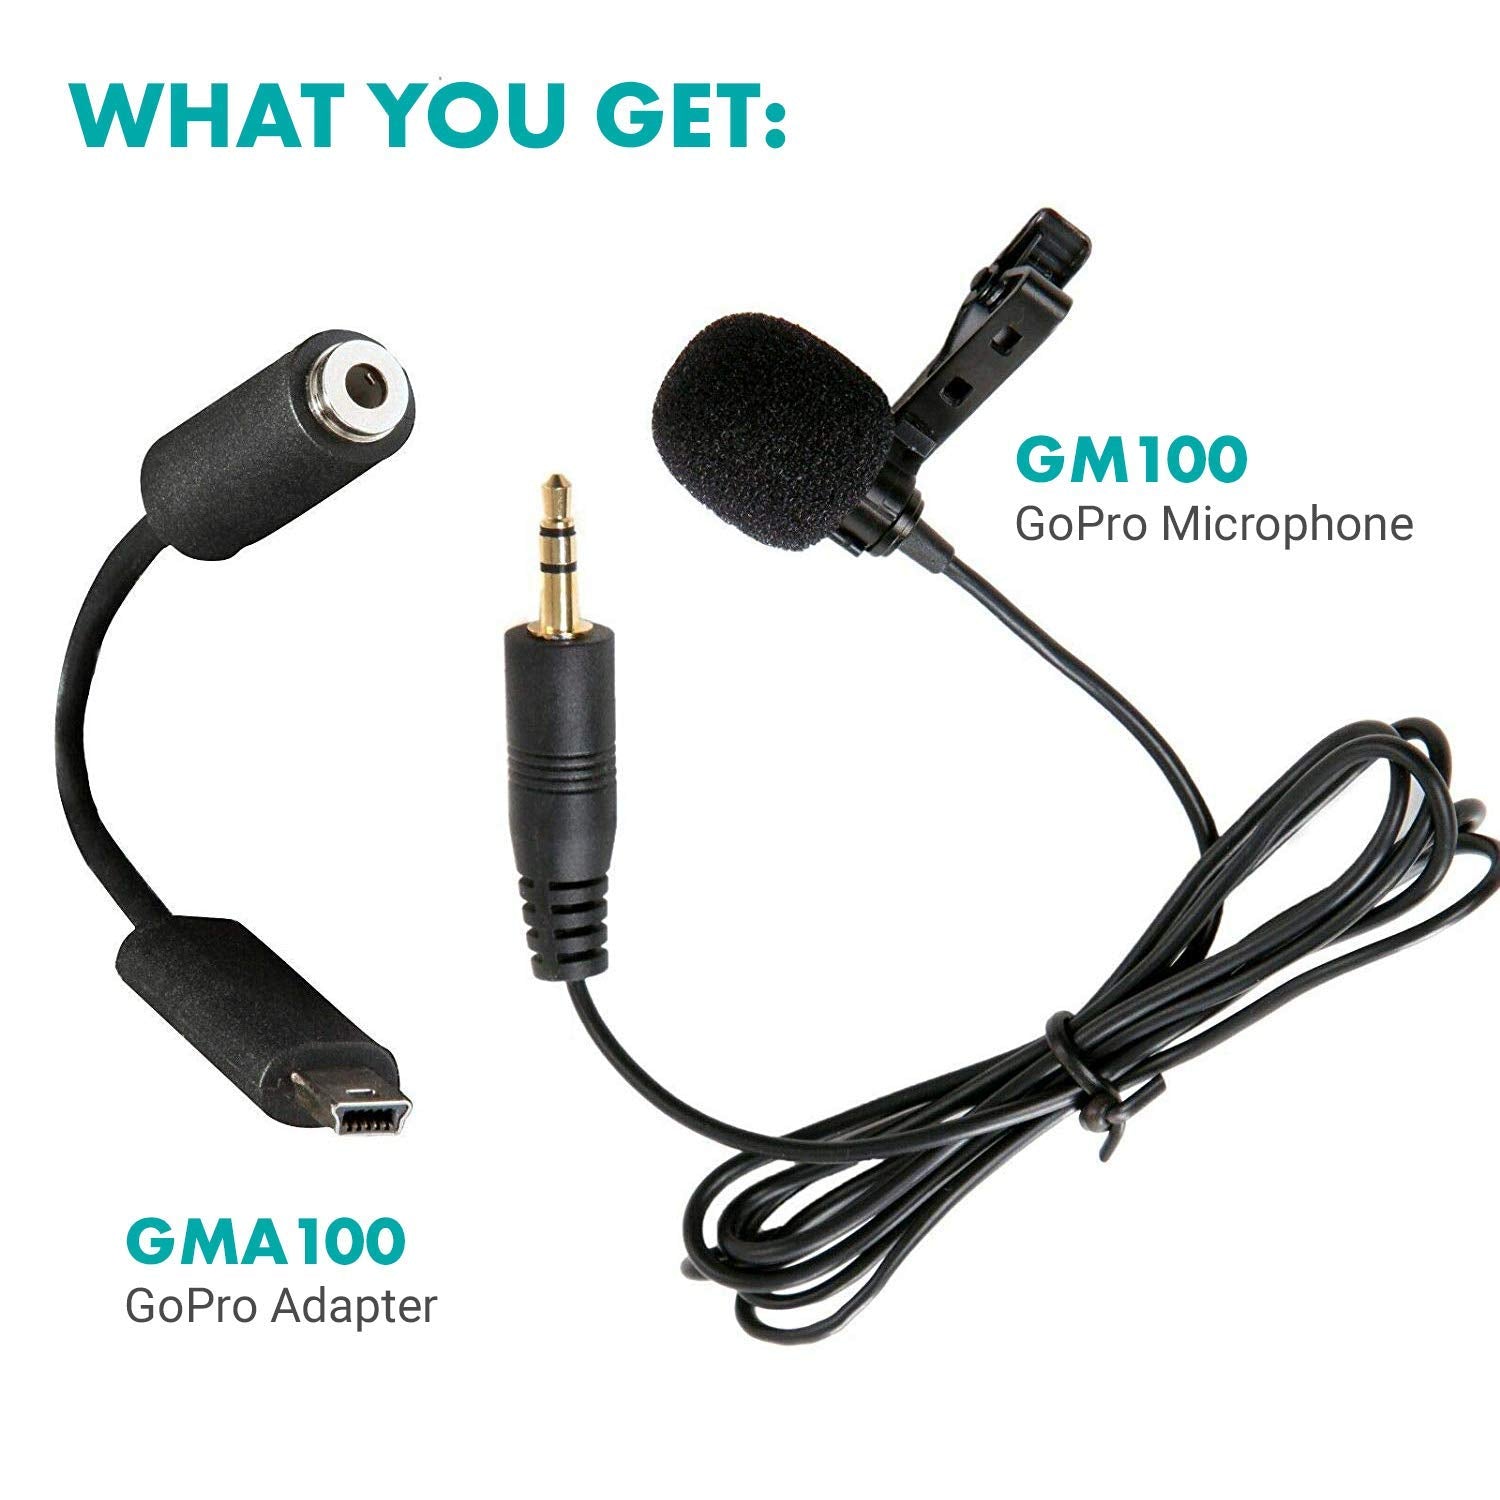 Movo GM100 Clip-on Lavalier Microphone for Compatible with GoPro HERO3, HERO3+ and HERO4 Black, White and Silver Editions - Includes Mic Adapter for Go Pro  - Good